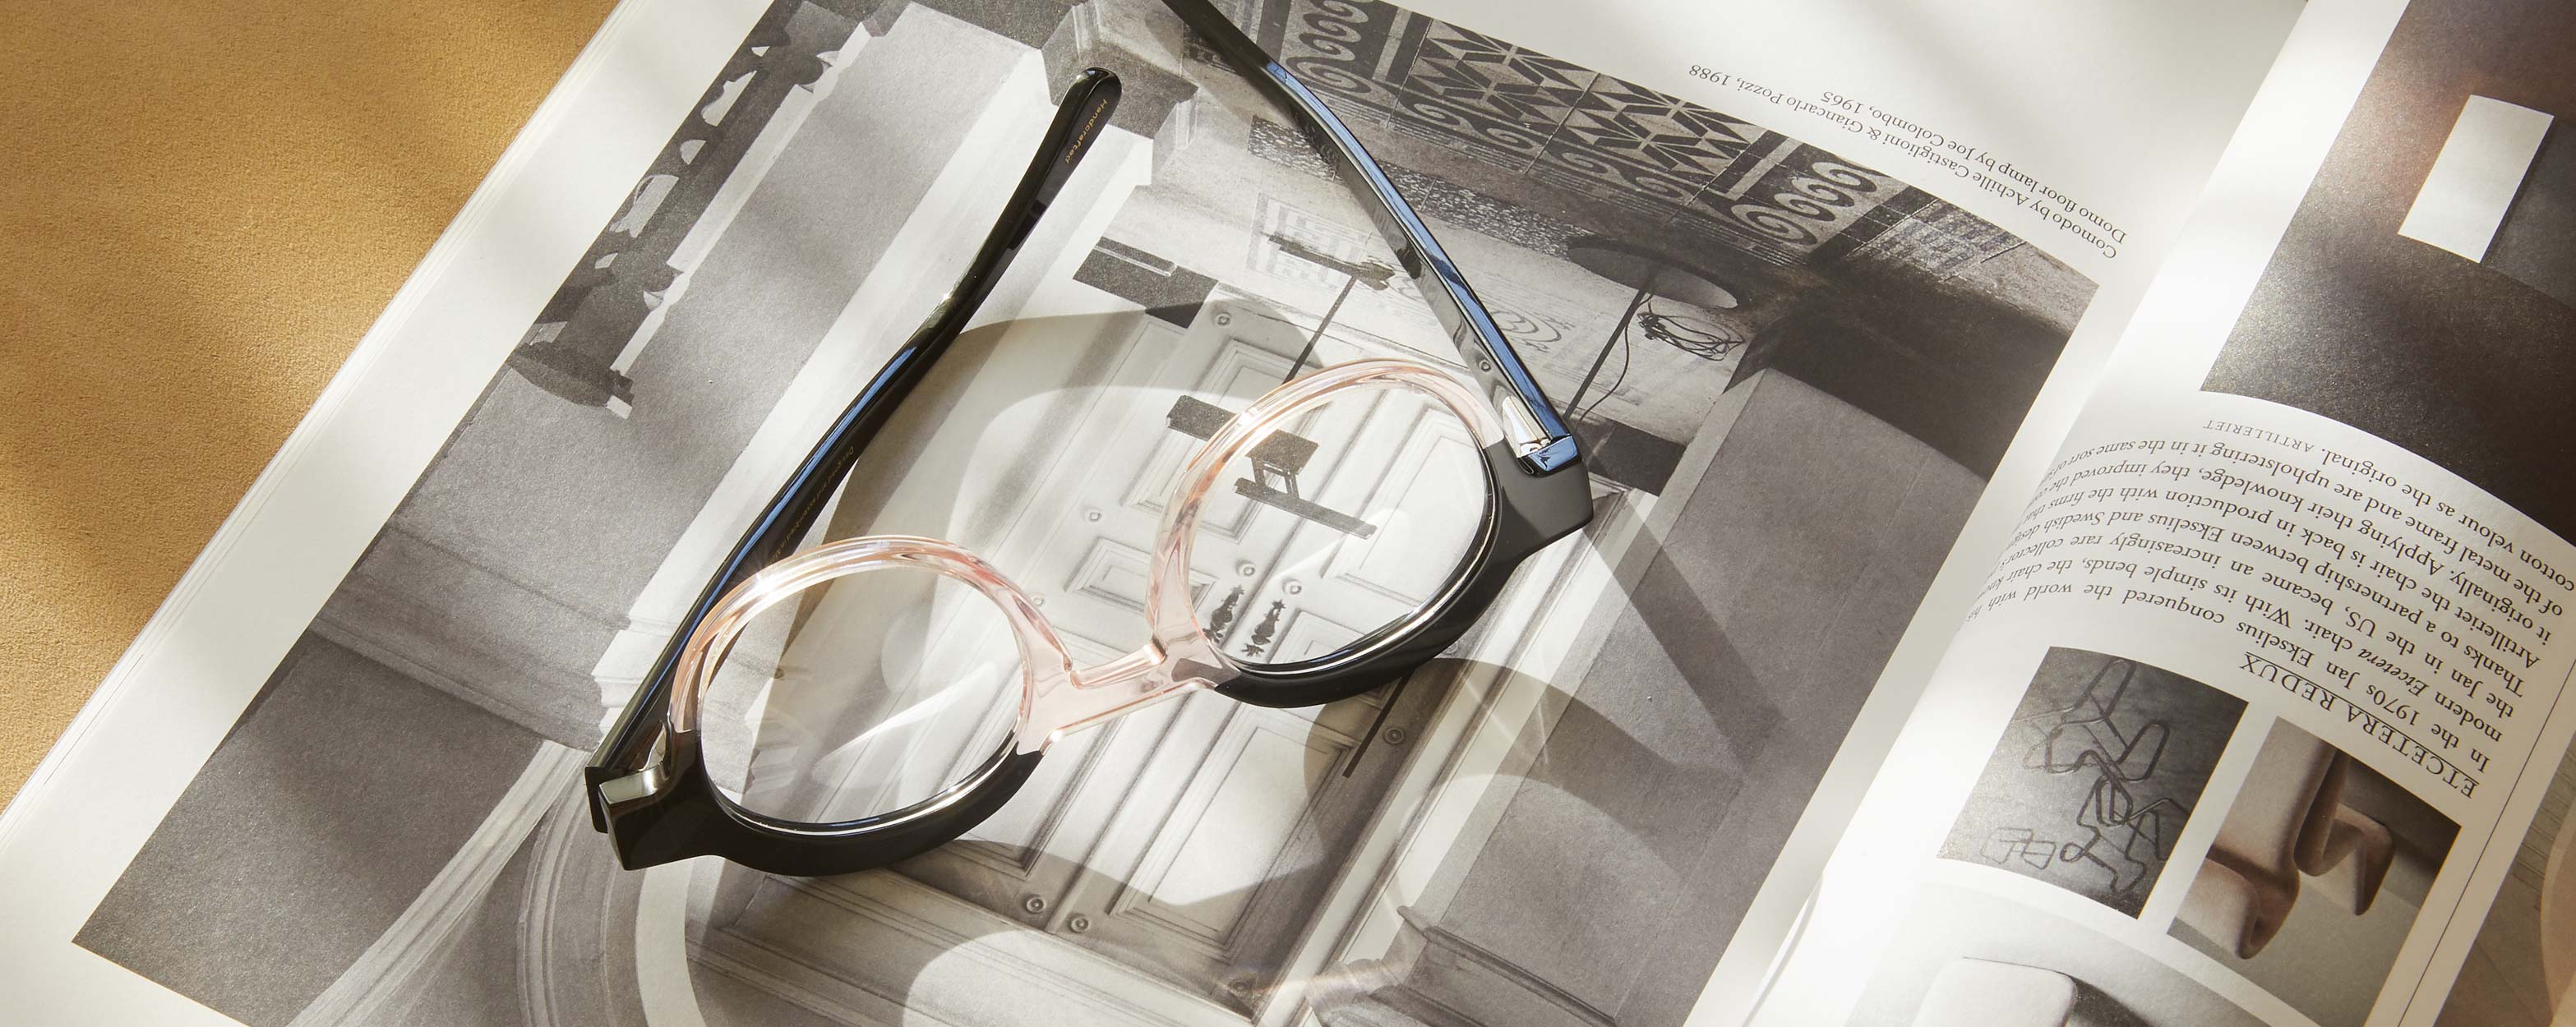 Photo Details of Charlotte Midnight Marble Reading Glasses in a room